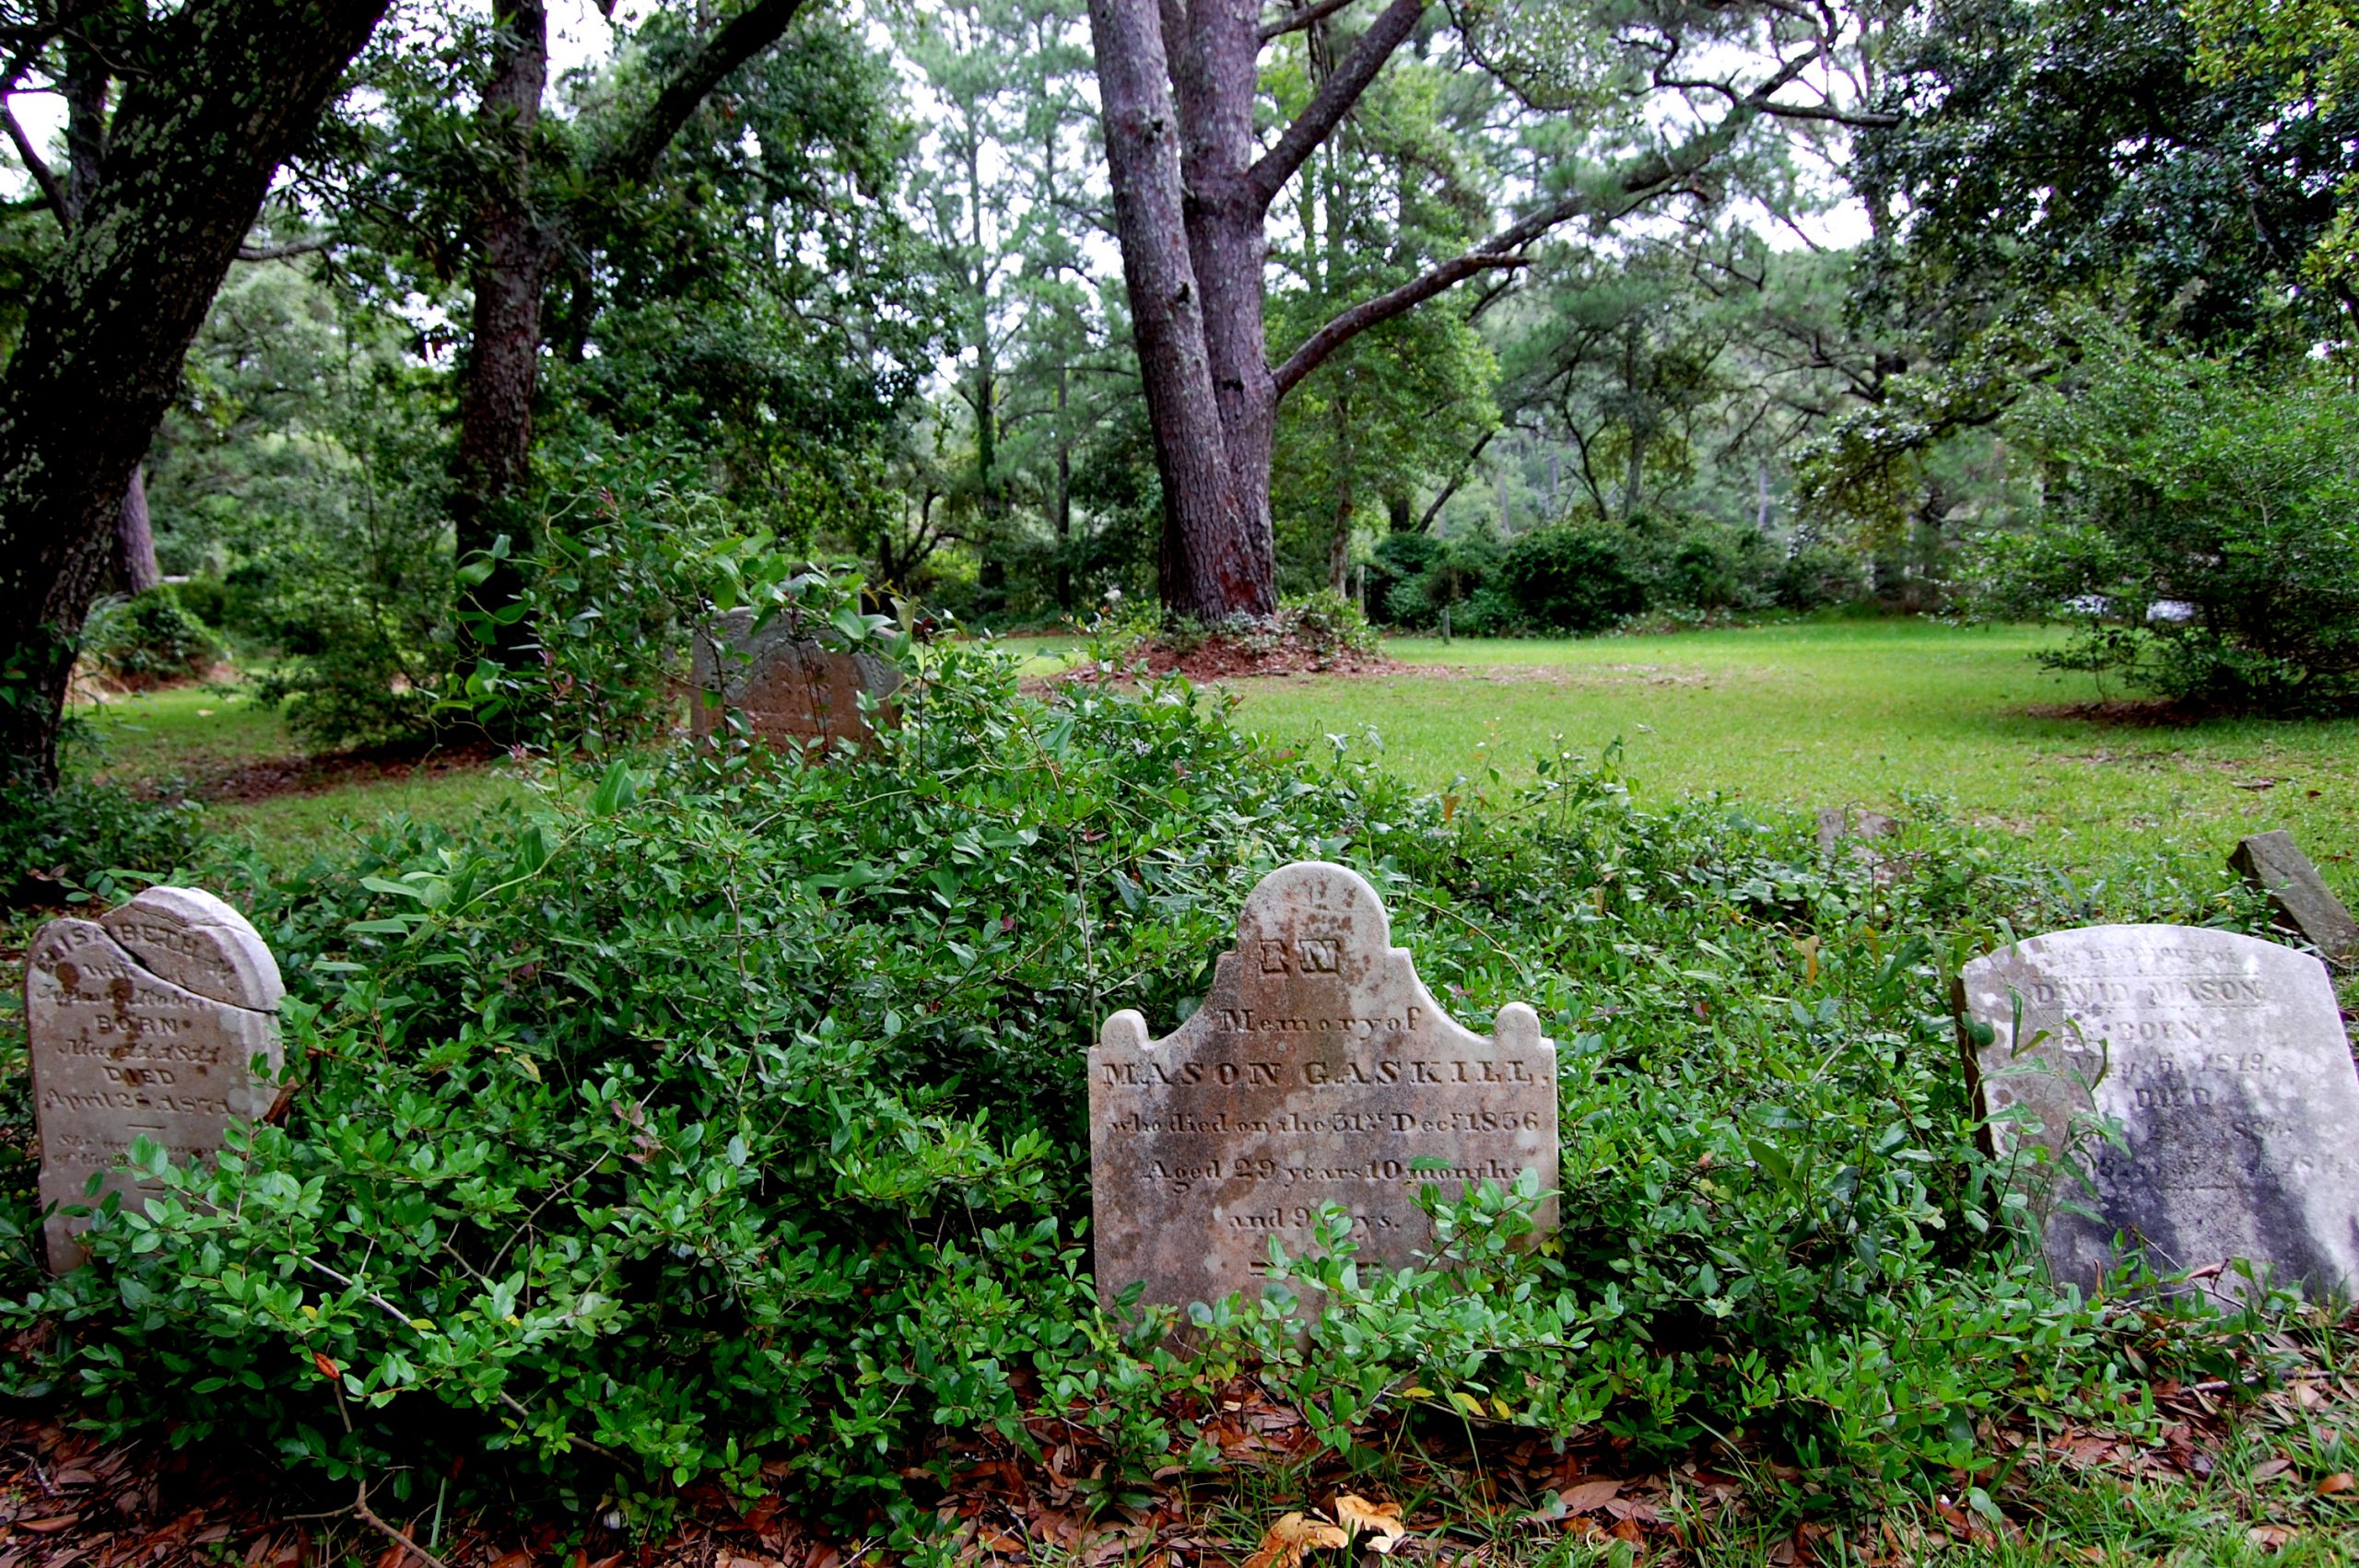 Backyard family cemetery with four gravestones amongst shrubs. There are threes and grass in the background.